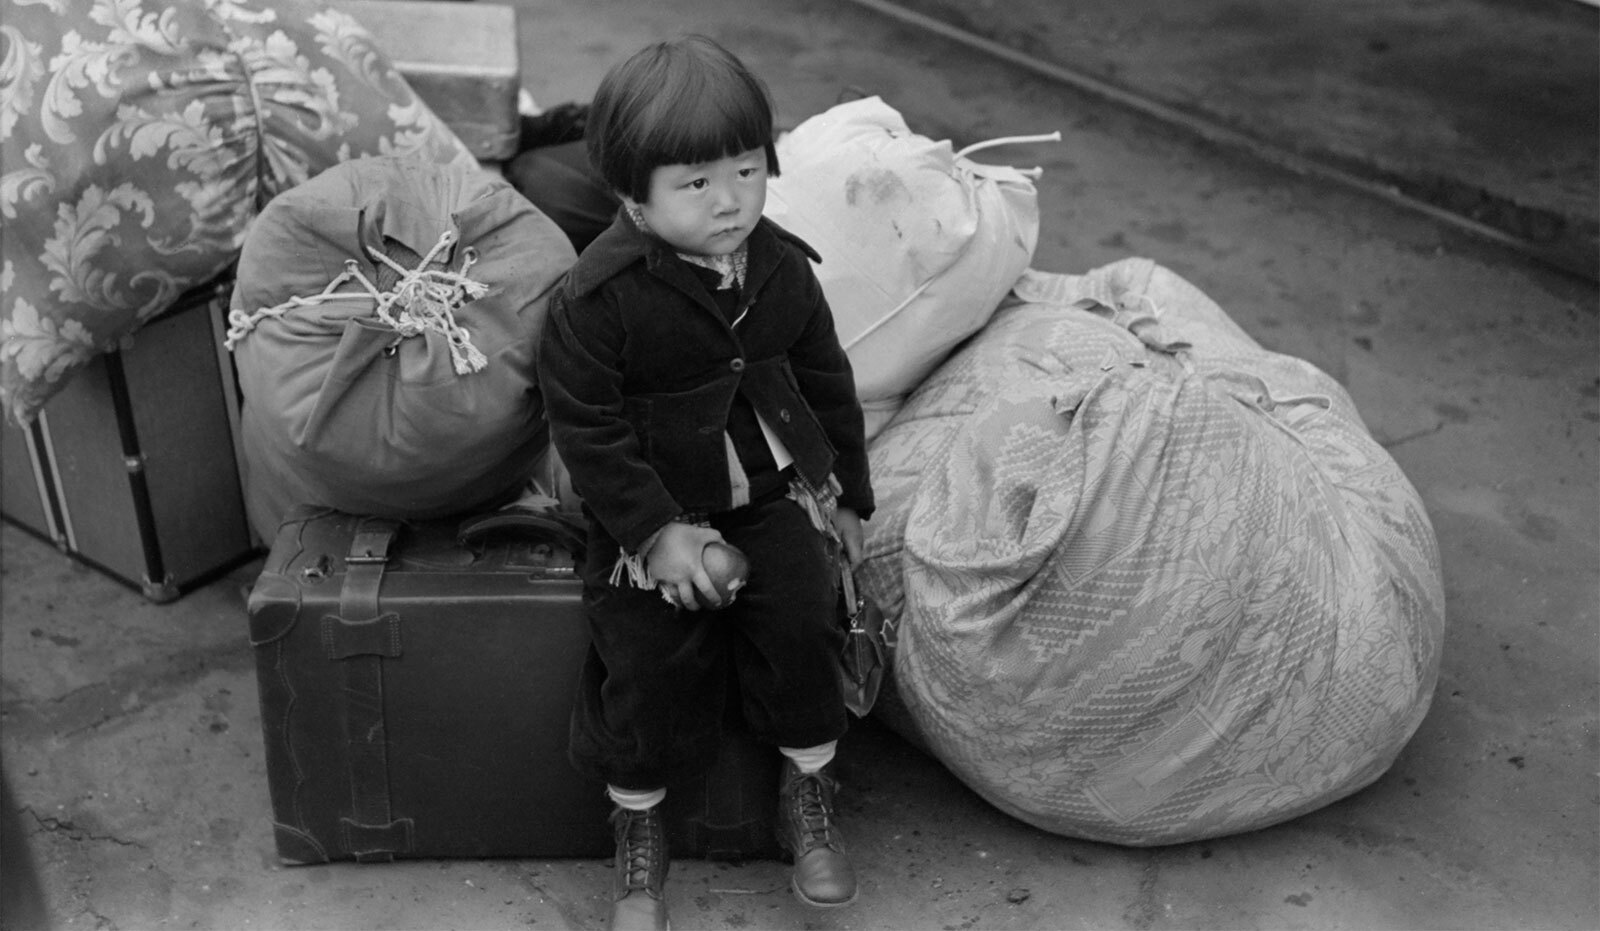 This image shows a 1942 photograph of a Japanese-American child waiting for train in Los Angeles, California.